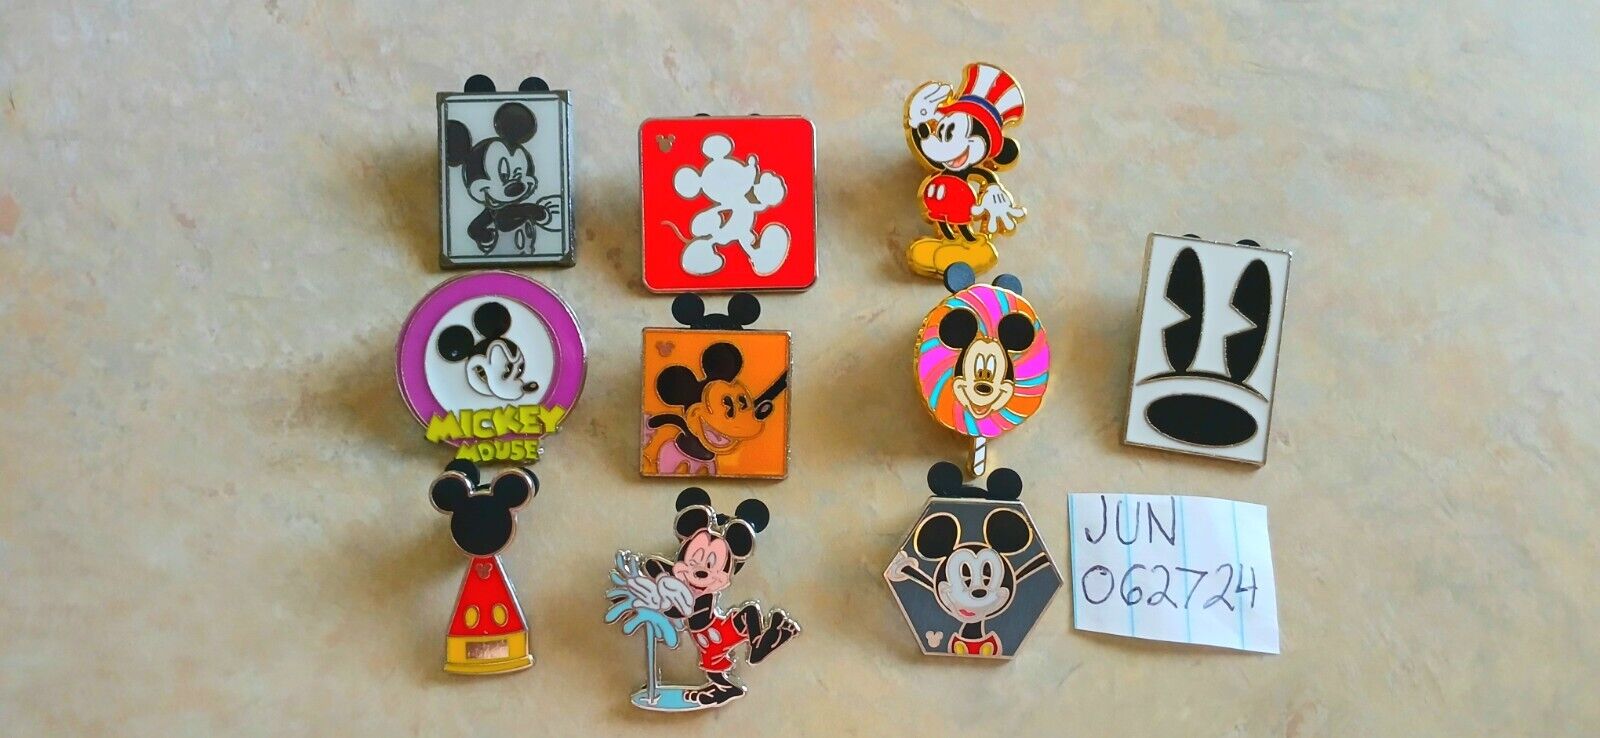 🔥DISNEY MICKEY MOUSE🔥 LOT OF 10 EXACT PINS🔥